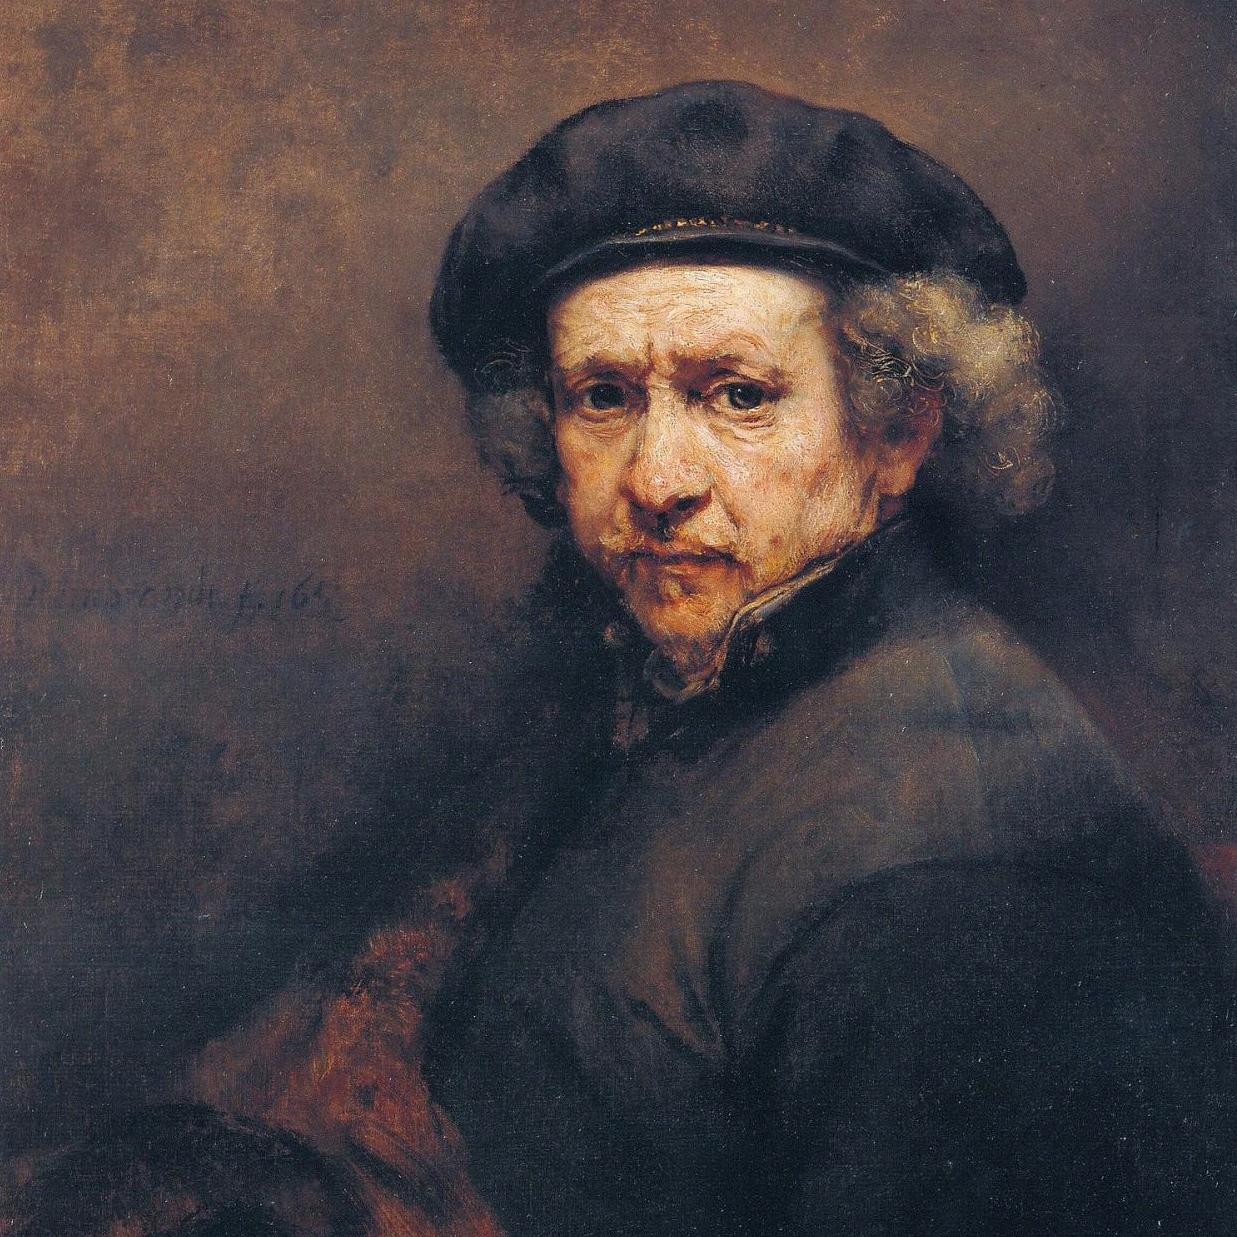 Rethinking Art History with Rembrandt Specialist Ernst van de Wetering - Appointments & Obituaries